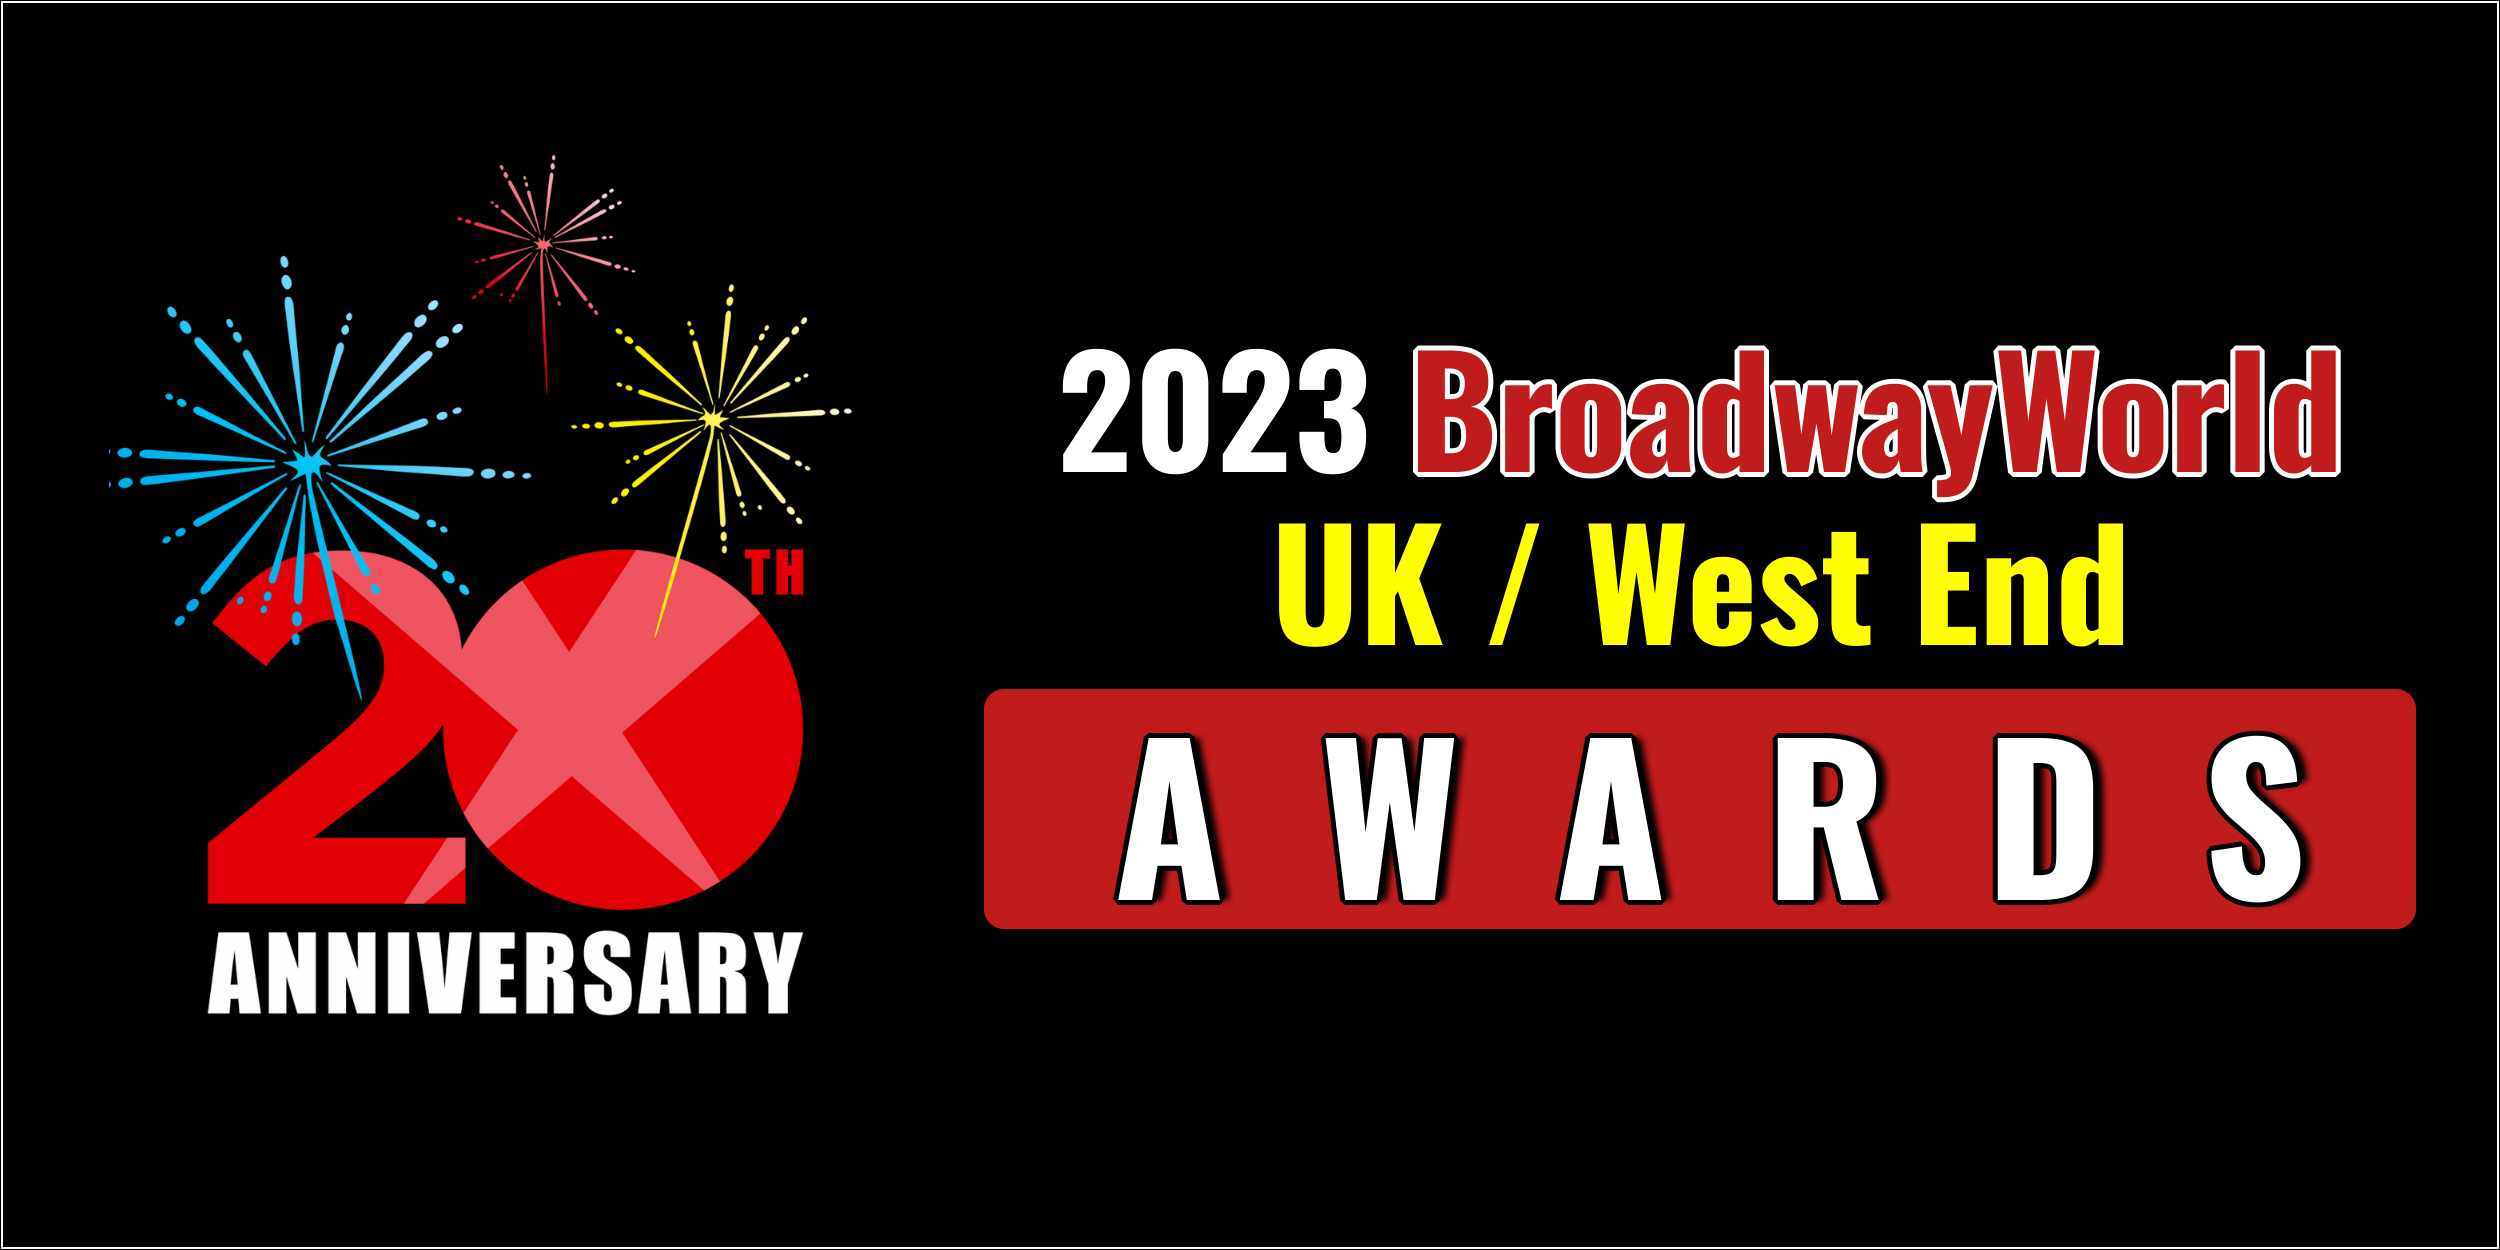 Latest Standings Announced For The 2023 BroadwayWorld UK / West End Awards 